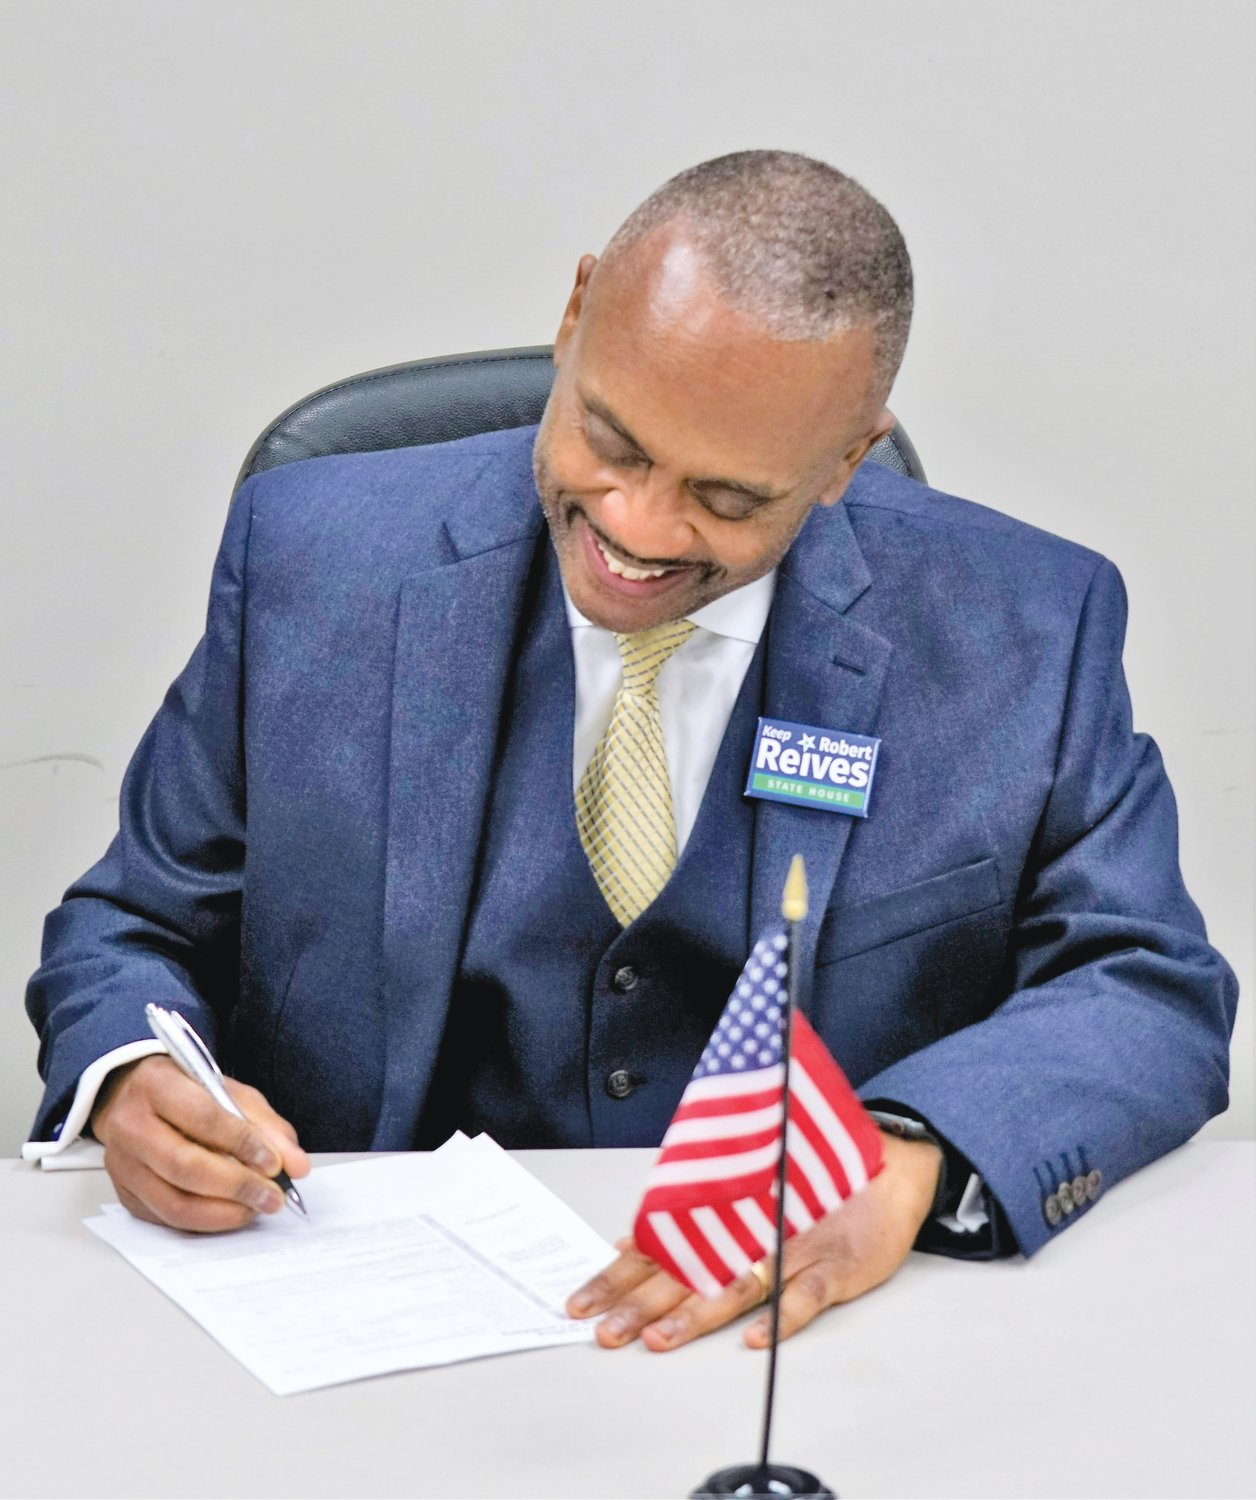 Rep. Robert Reives II (D-Dist. 54) filed for reelection before filling was stopped. Reives has served in the N.C. House since 2014.